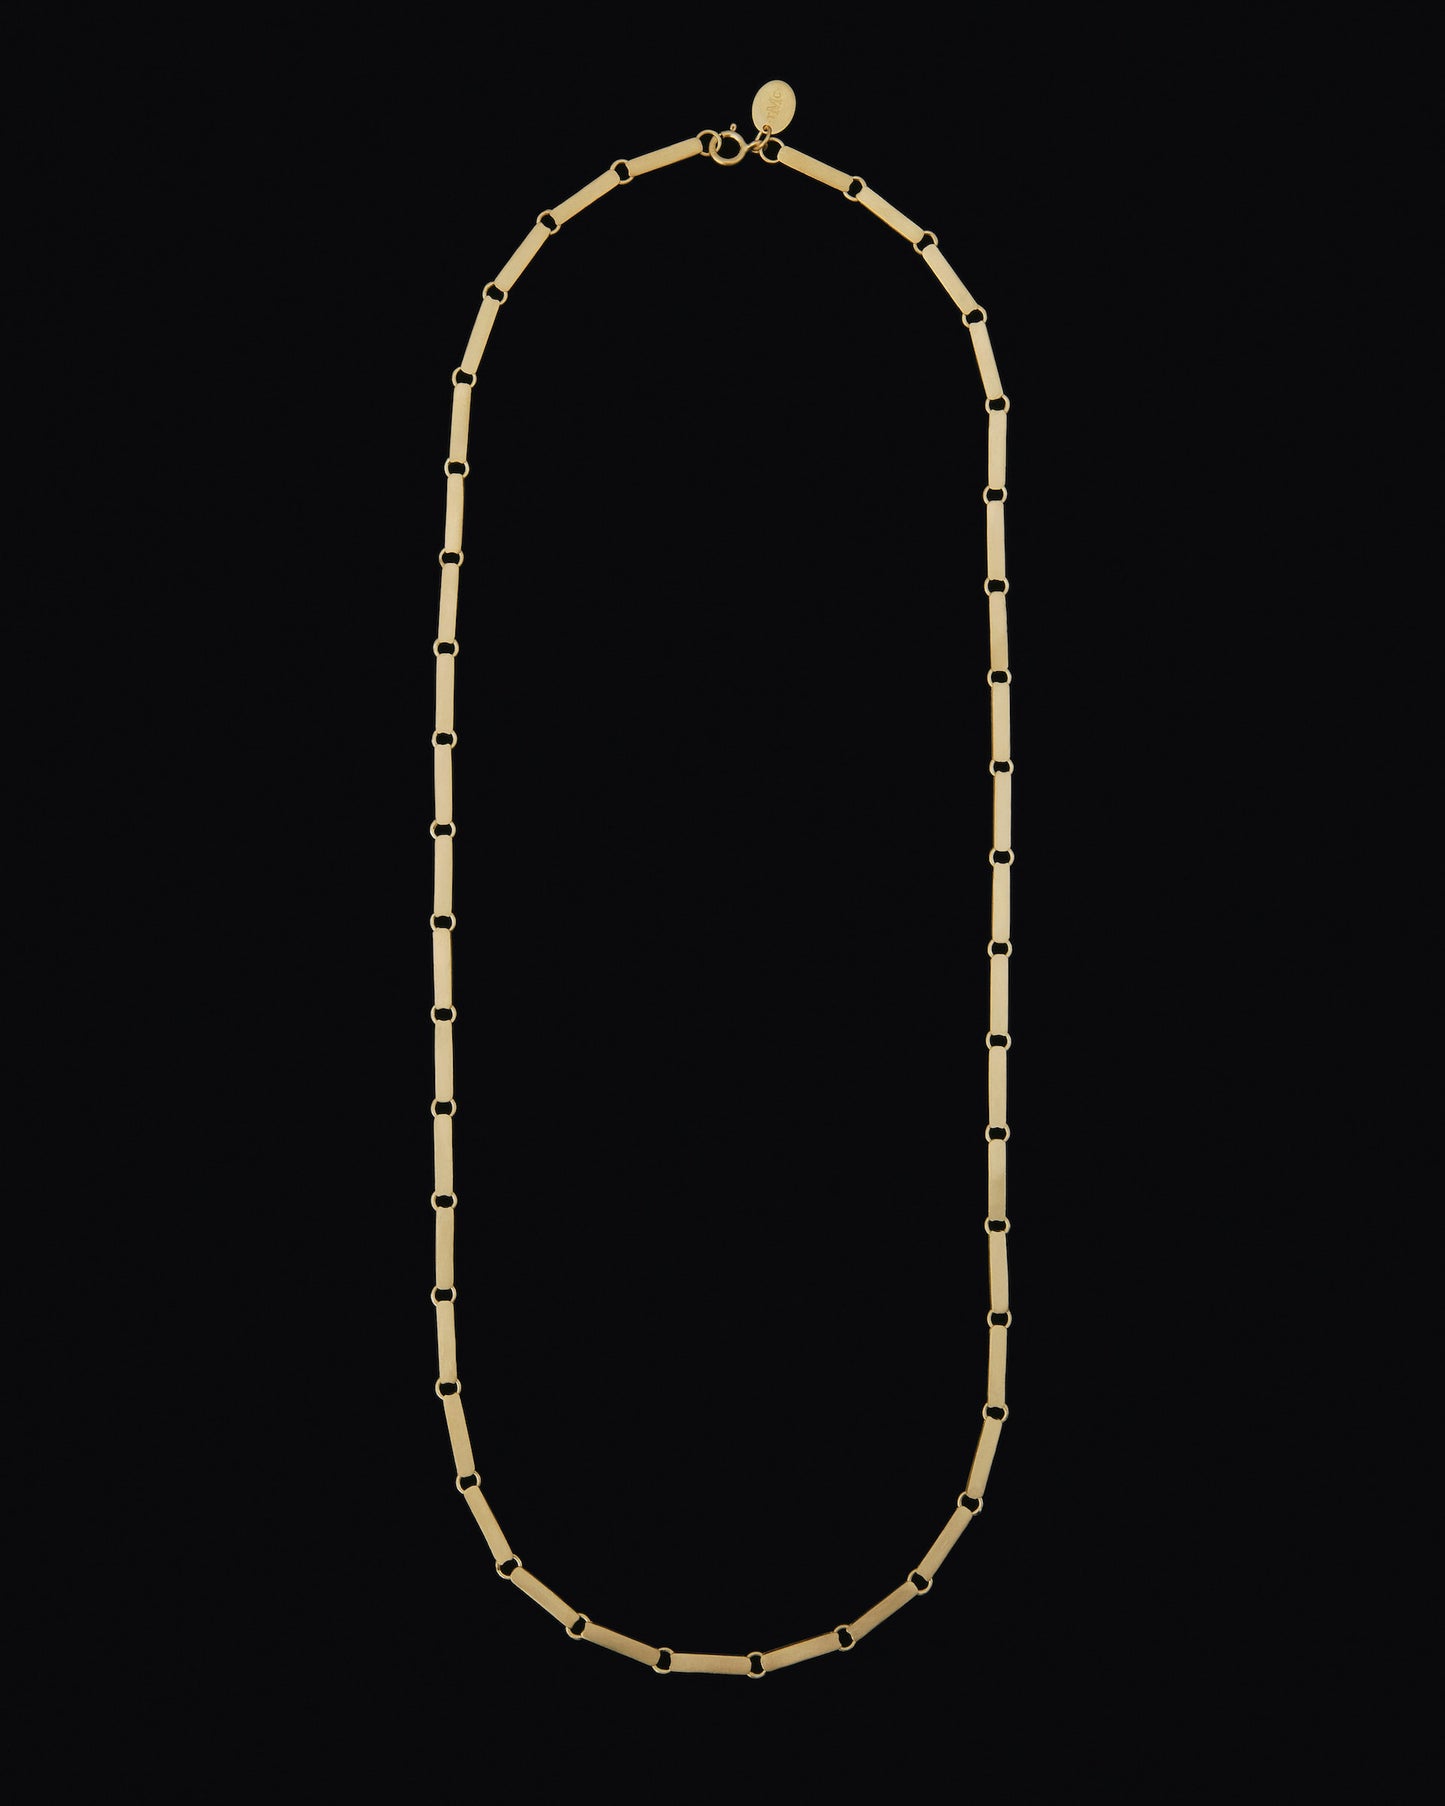 Tiana Marie Combes Estate Chain in 14k Yellow Gold.